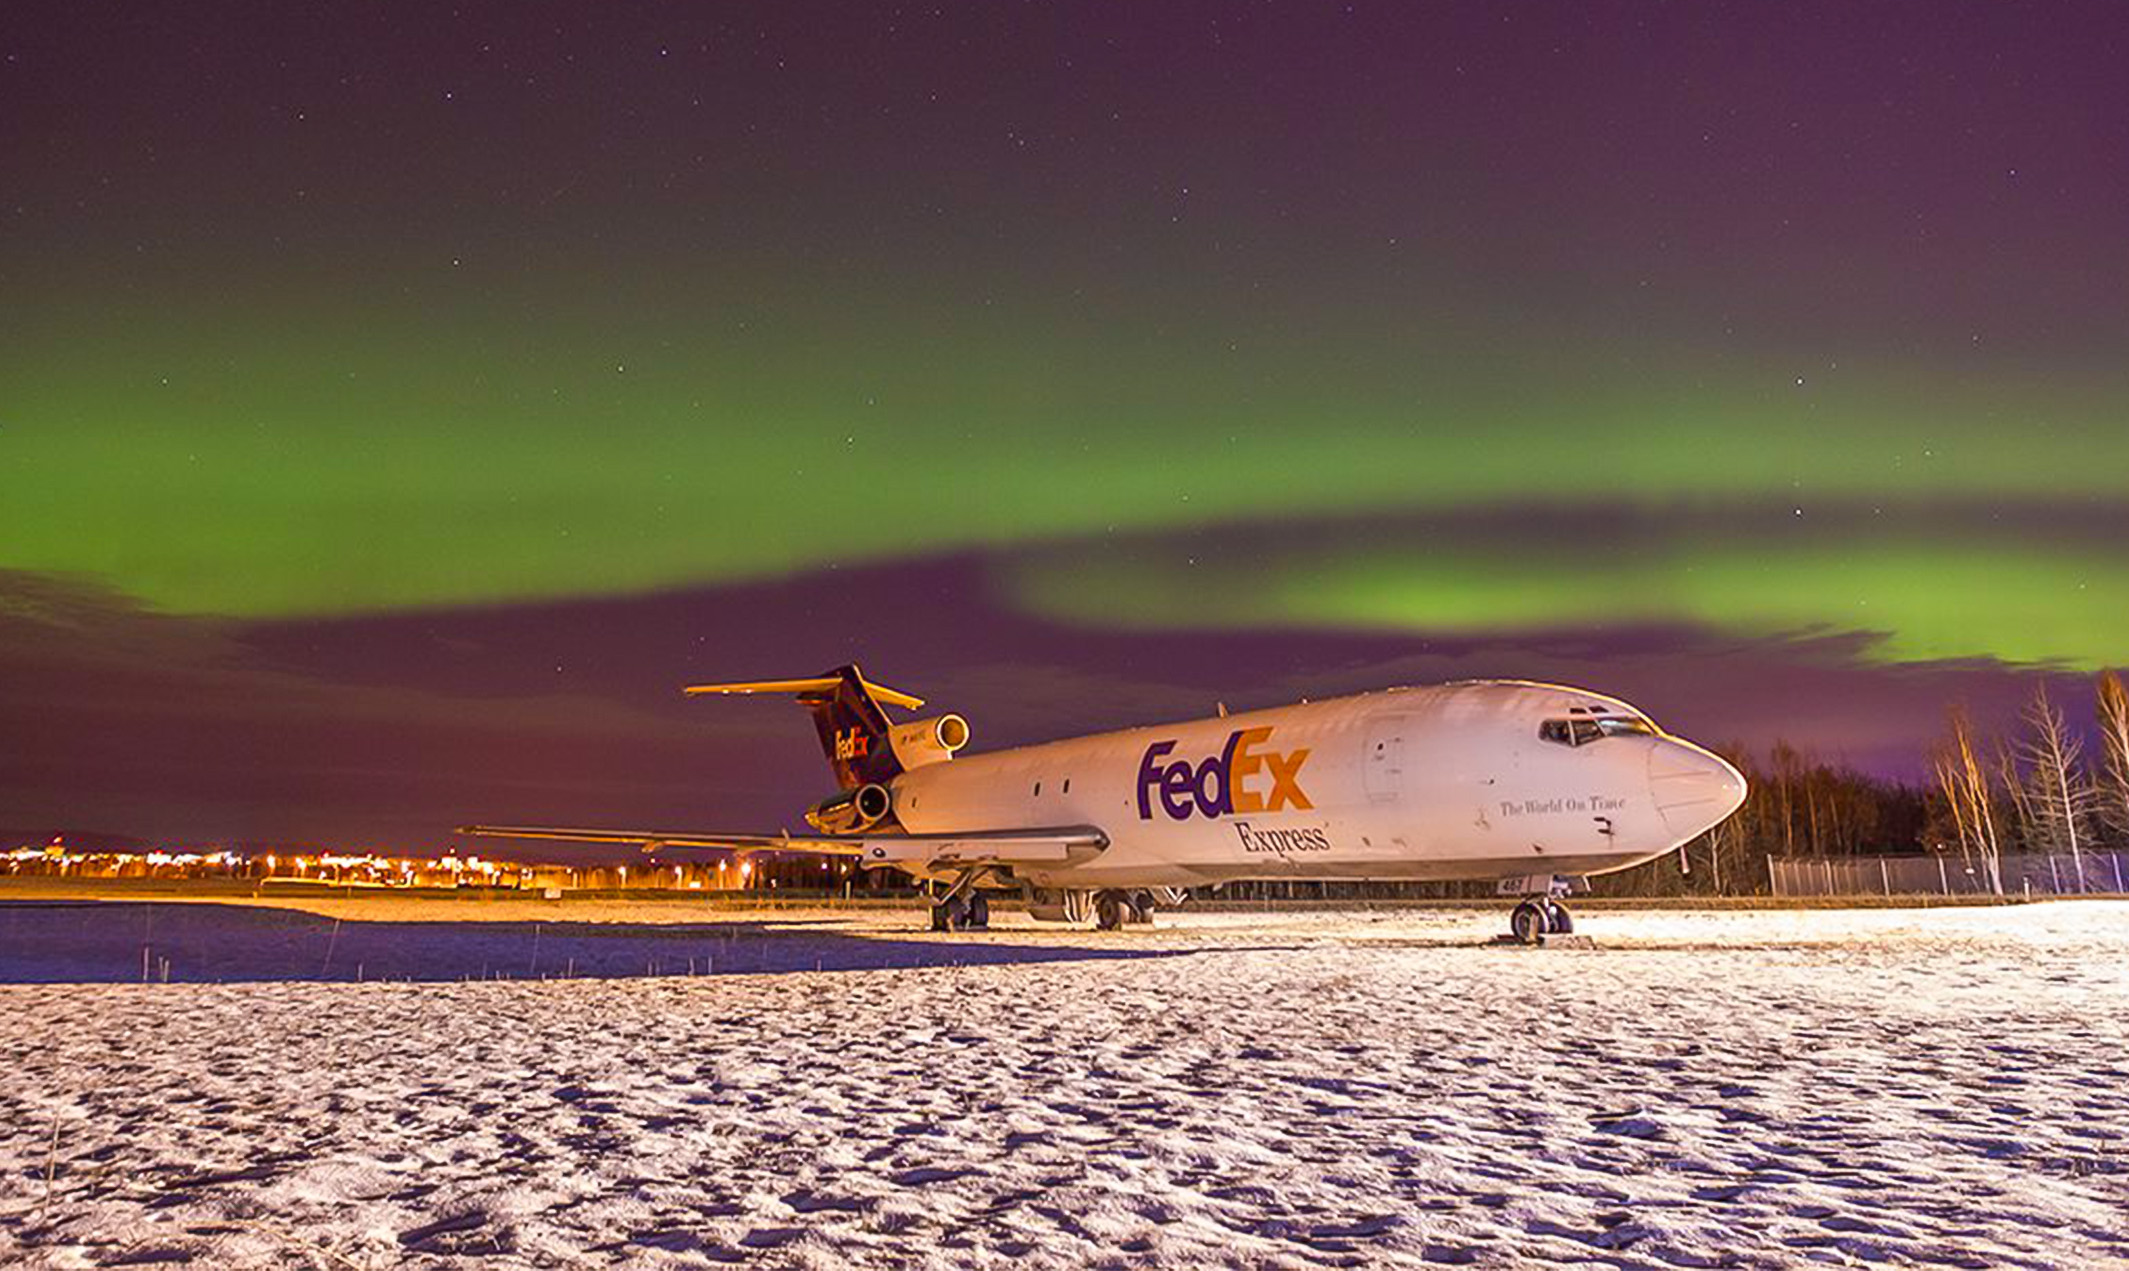 A Boeing 727 jet with a FedEx logo sits on a snowy runway under the northern lights.